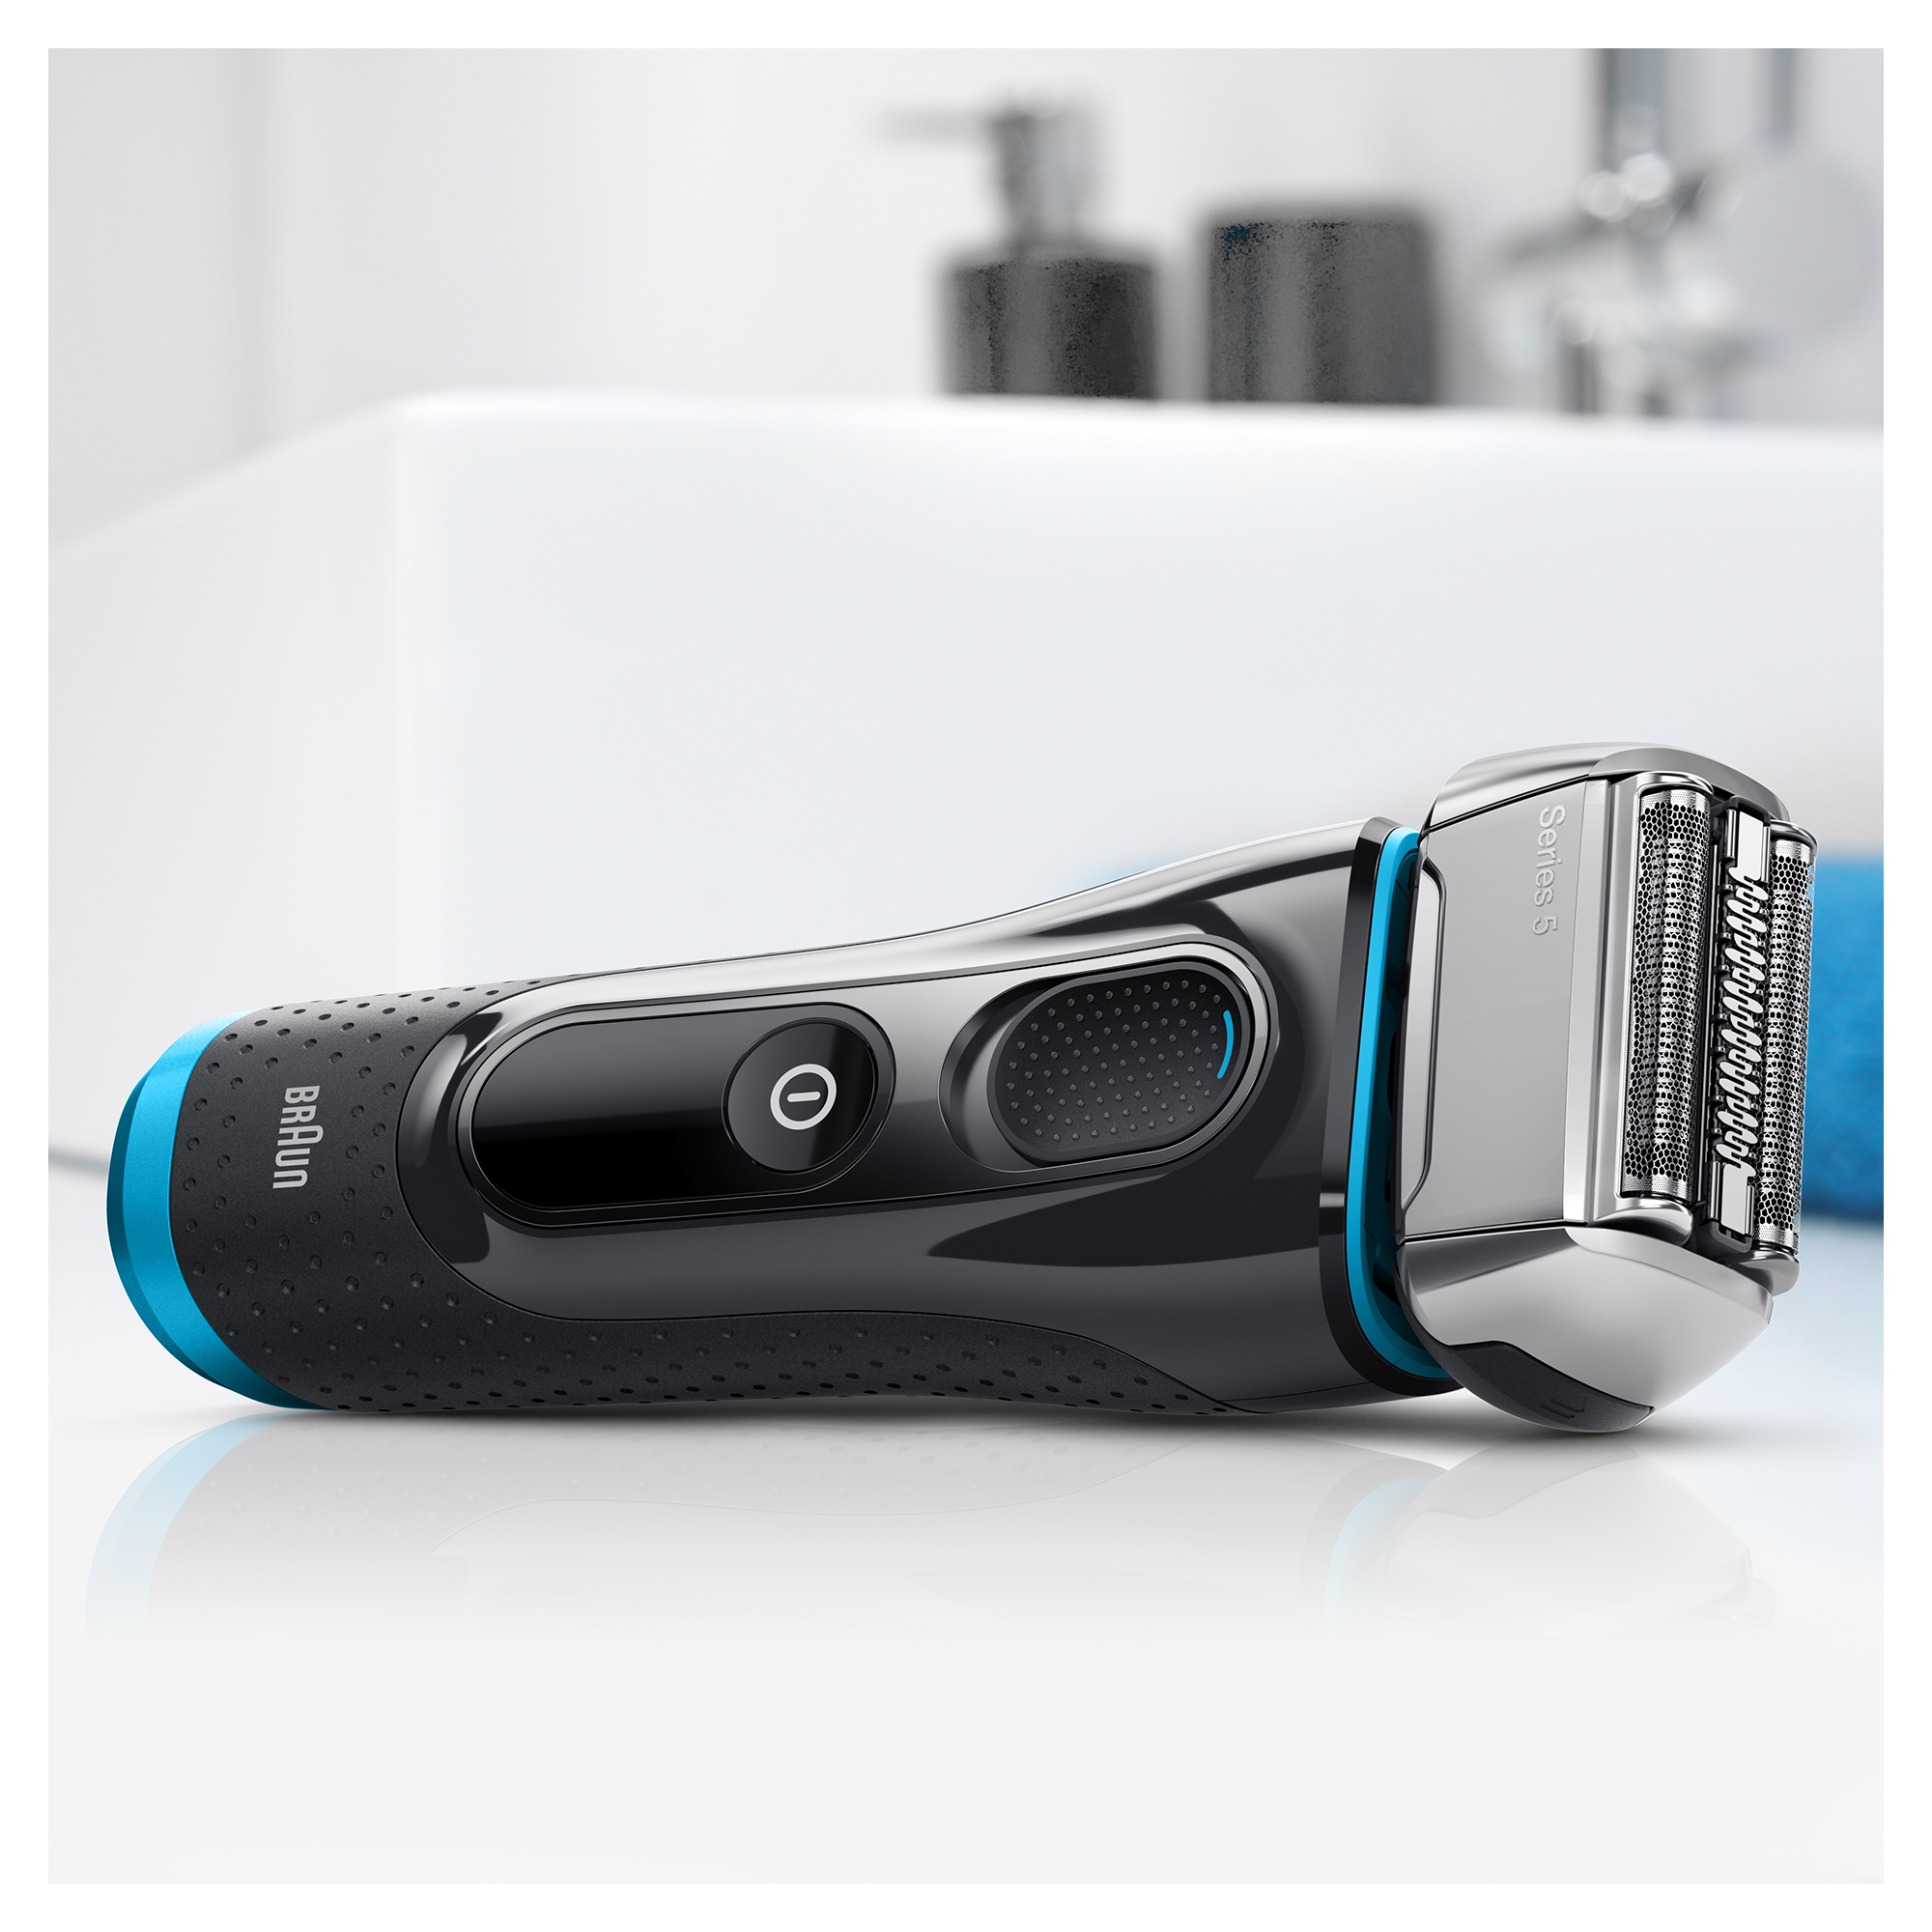 Braun Series 5 5190cc Mens Wet Dry Electric Shaver with Clean Station - image 5 of 7